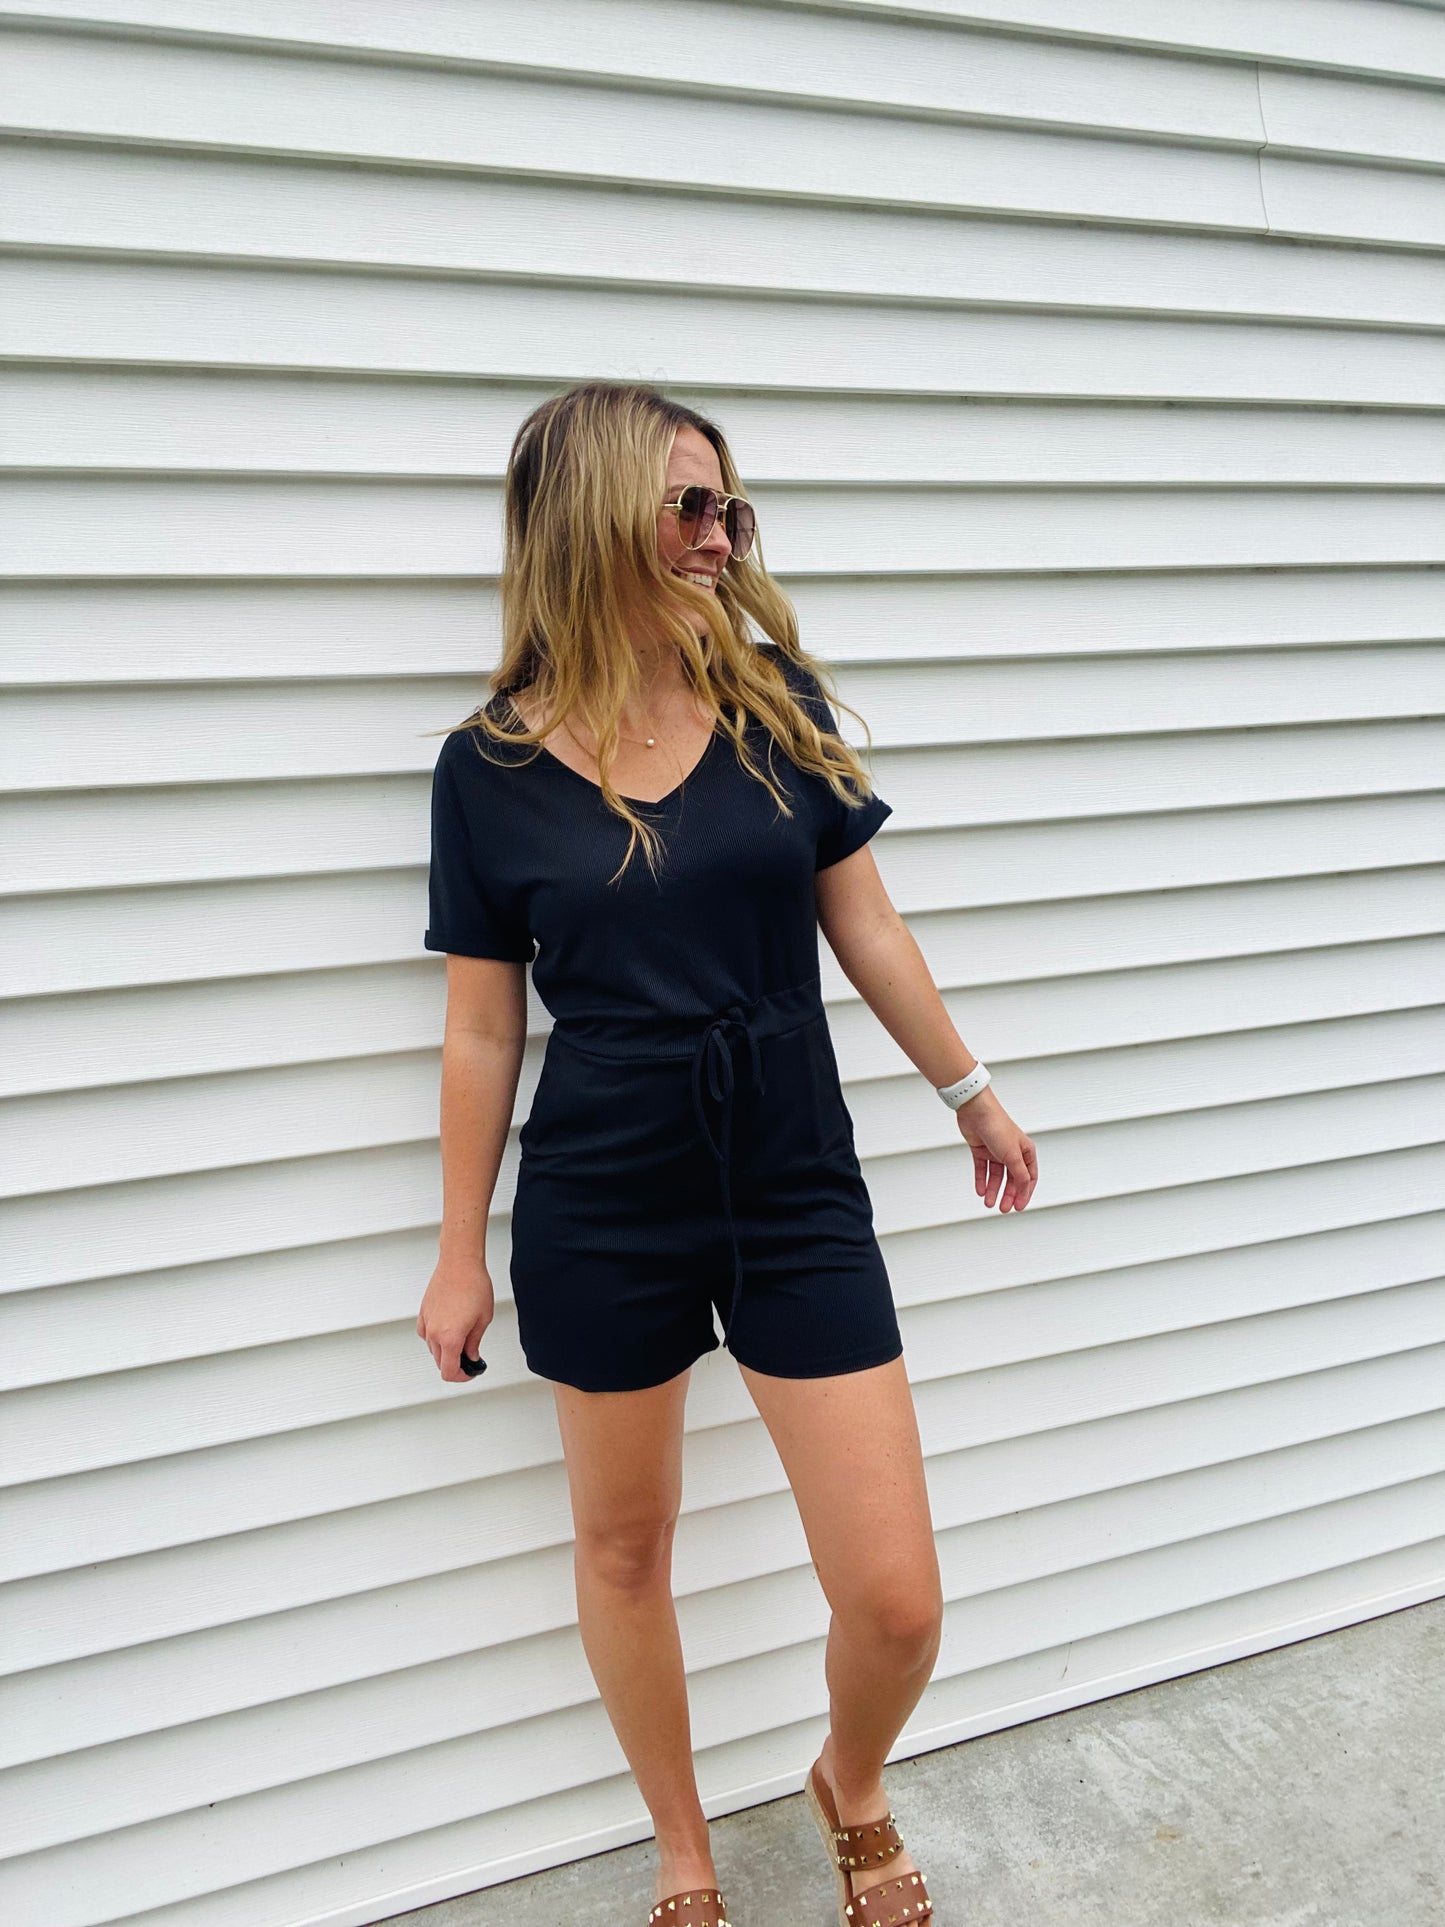 This Black Ribbed Abby Romper offers all-day comfort and style. Made of a lightweight fabric, it features a drawstring waistband, scoop neck neckline, and a casual, cute look. Perfect for pairing with a blazer or jean jacket and sneakers. Enjoy effortless style and comfort.